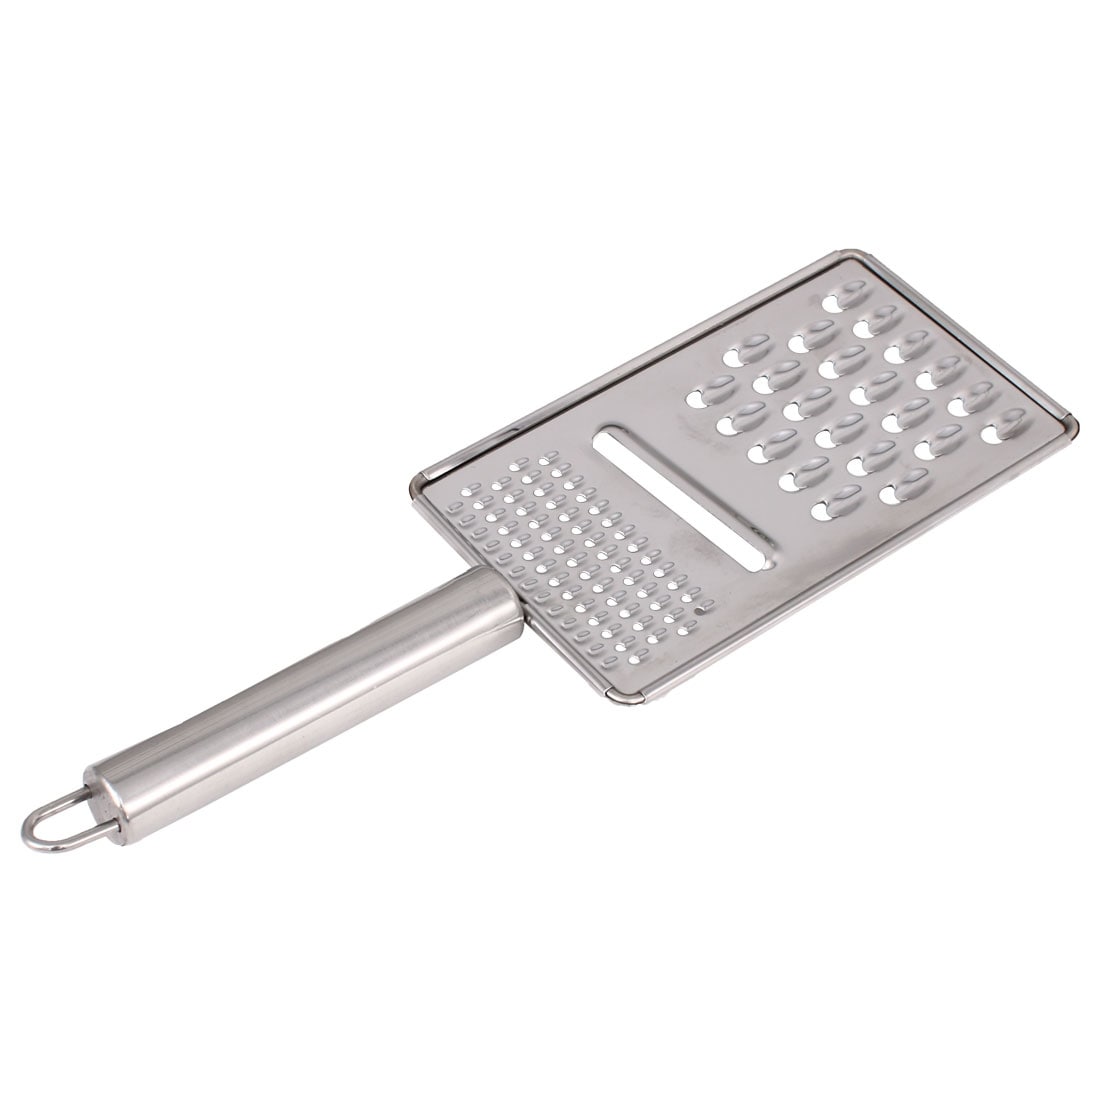 https://ak1.ostkcdn.com/images/products/is/images/direct/33be23c7a0a442a30b614e6eea7850d7fd1f84ca/Stainless-Steel-Cheese-Grater-Multifunction-Vegetable-Grater.jpg